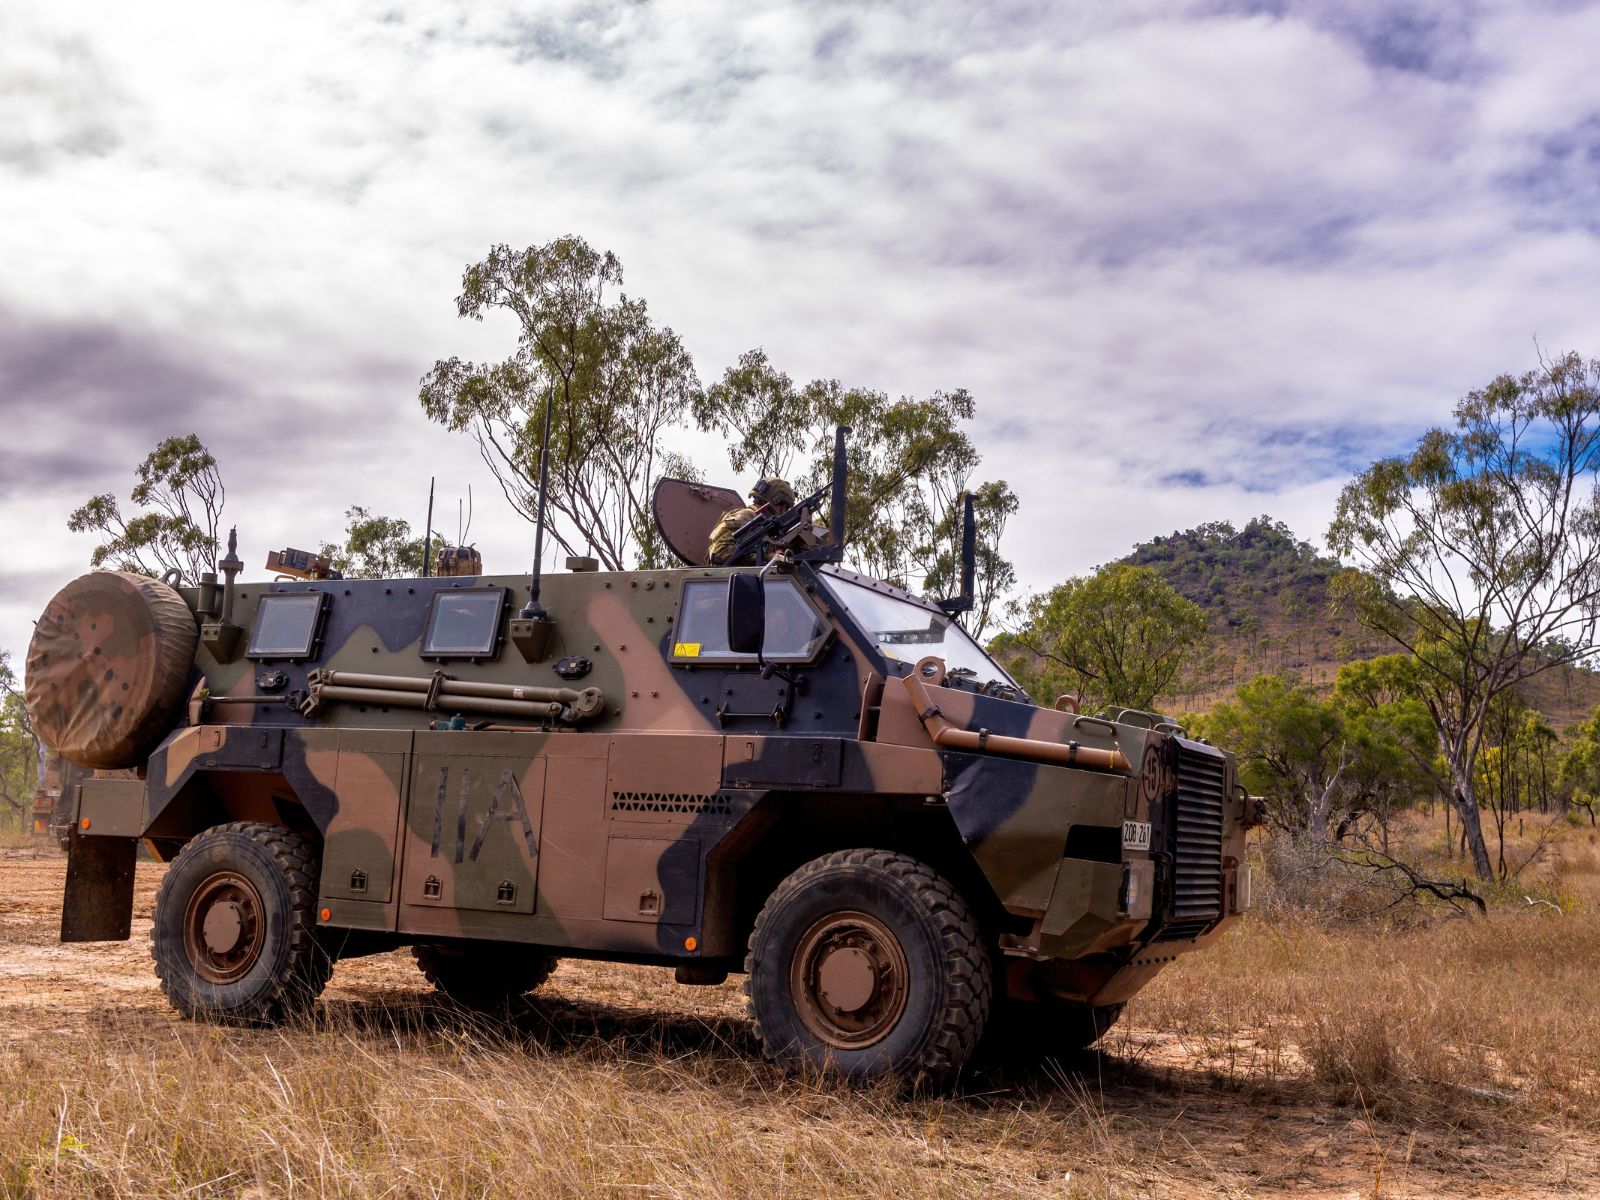 The Bushmaster infantry mobility vehicle is a success story of Australian science and technology innovation with DSTG researchers directly involved in its development since the early 2000s. It was back in 2004 that Dr Stephen Cimpoeru and his team tested and evaluated a range of protective accessories and rapidly introduced them into service on ASLAVs and Bushmaster infantry mobility vehicles. The vehicles continue to play a pivotal part in the Australian Defence Force.